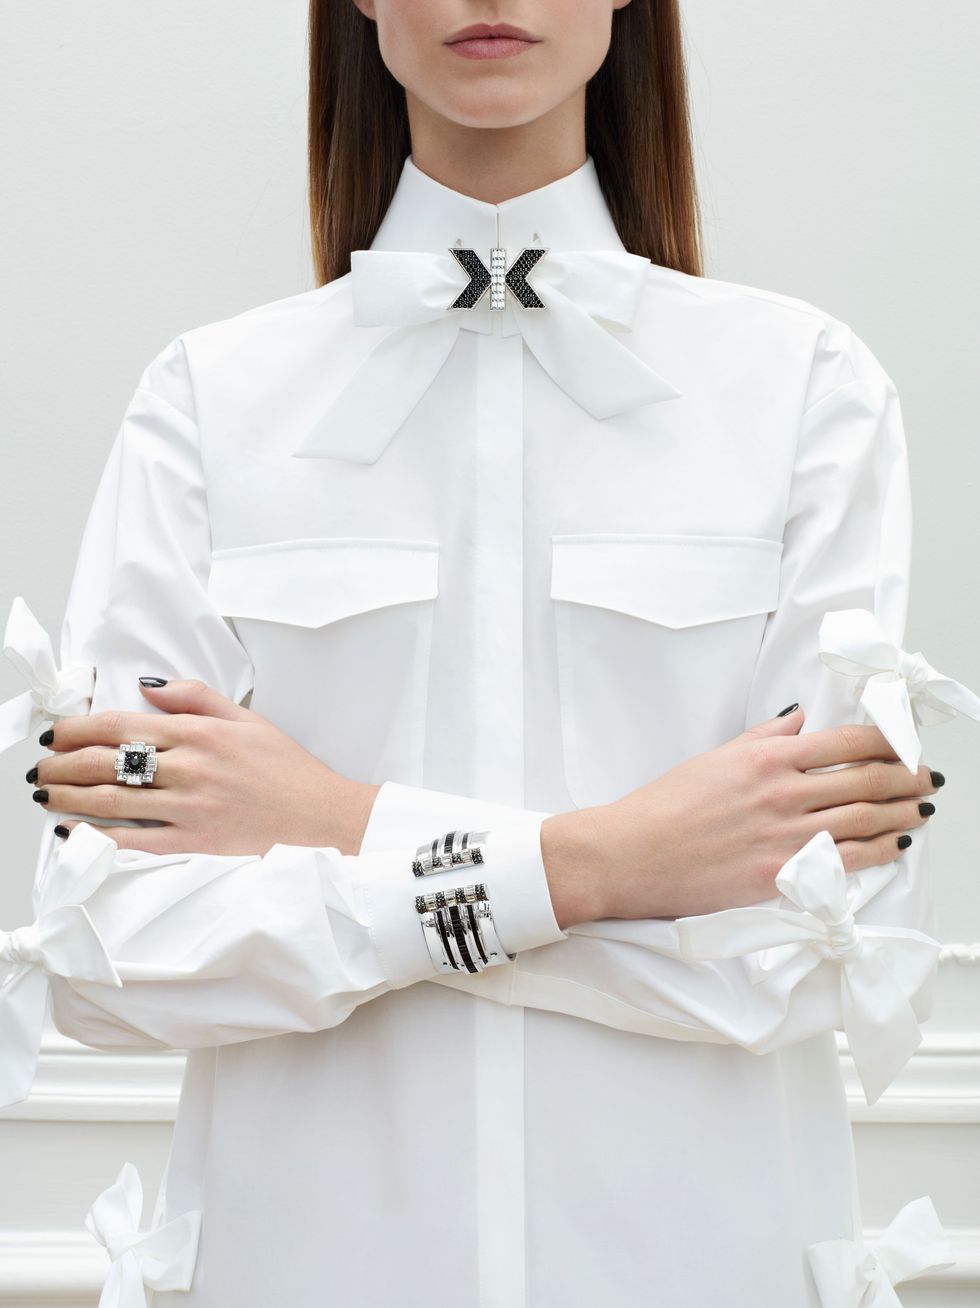 White, Clothing, Collar, Sleeve, Uniform, Shirt, Blouse, Neck, Formal wear, Bow tie, 